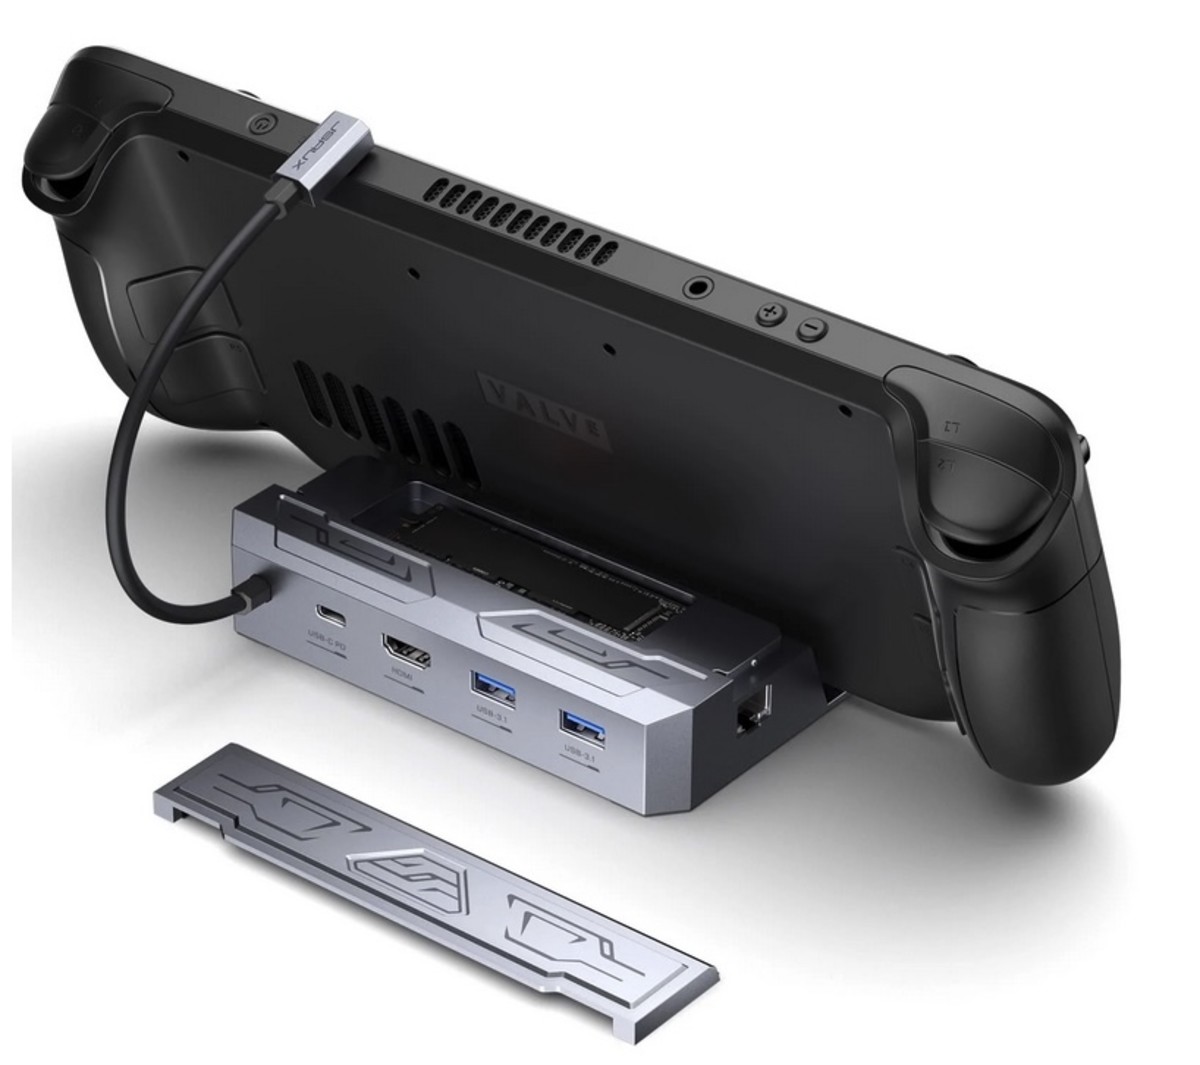 JSAUX’s M.2 Docking Station for Steam Deck Improves The Gaming Fun